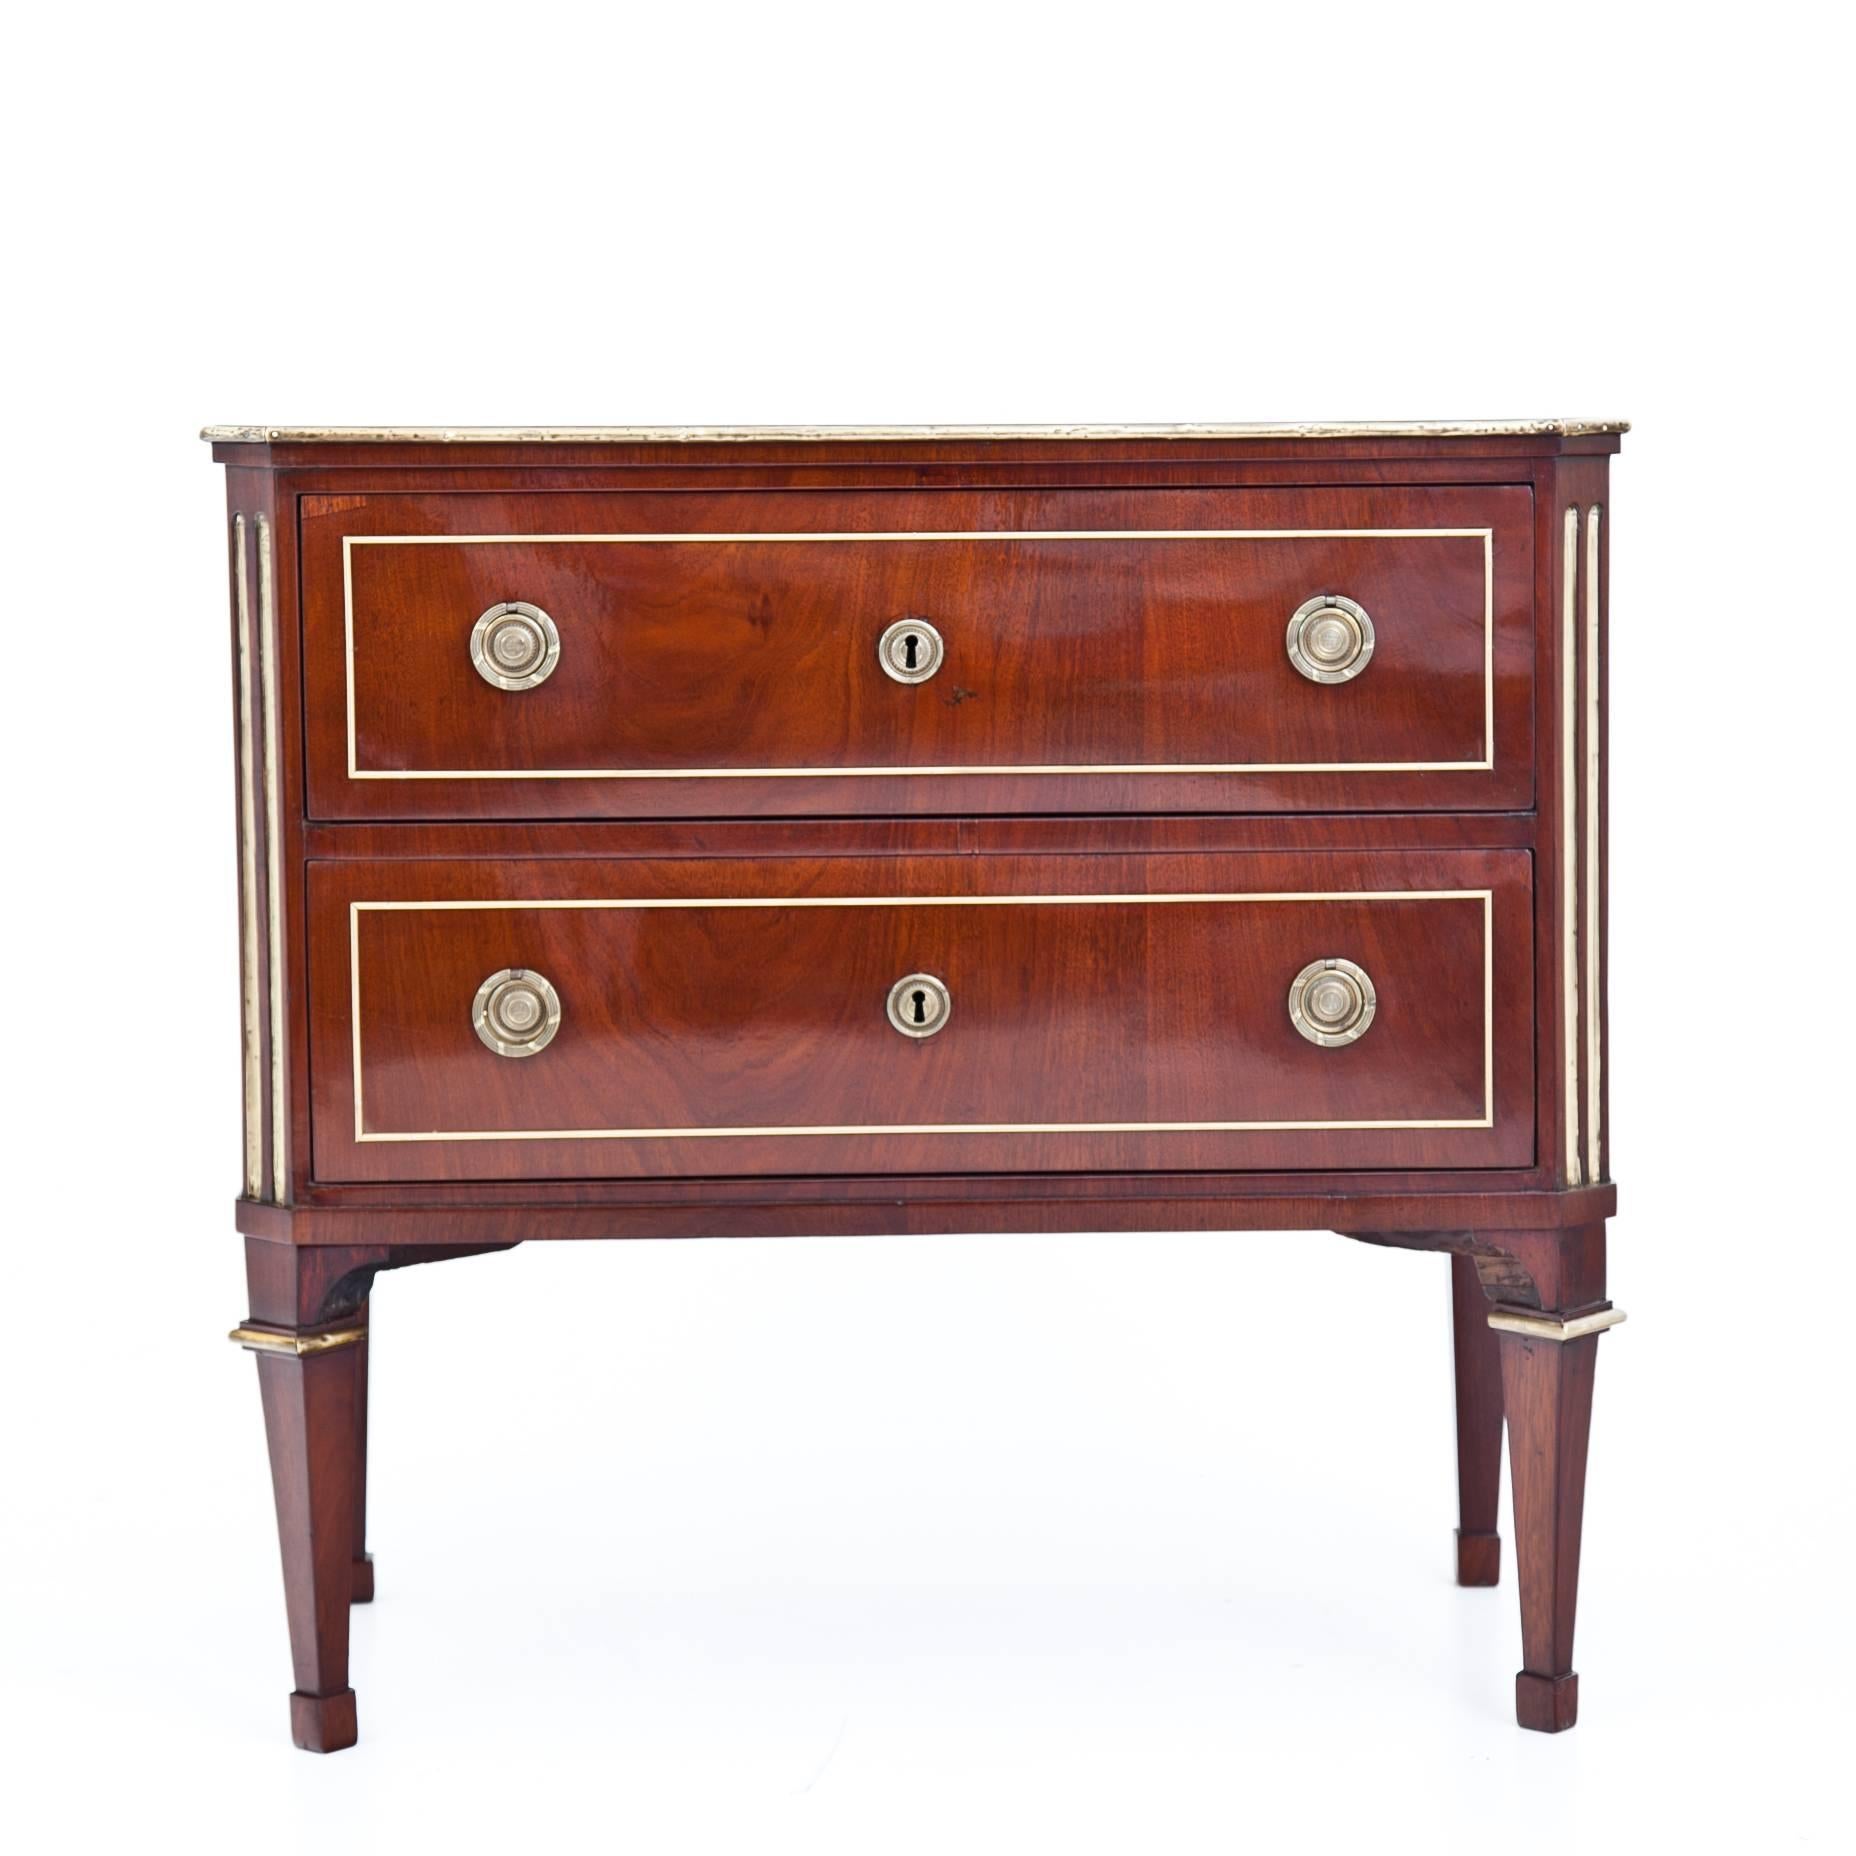 Neoclassical Mahogany Chest of Drawers, France, First Half of the 19th Century (Französisch)